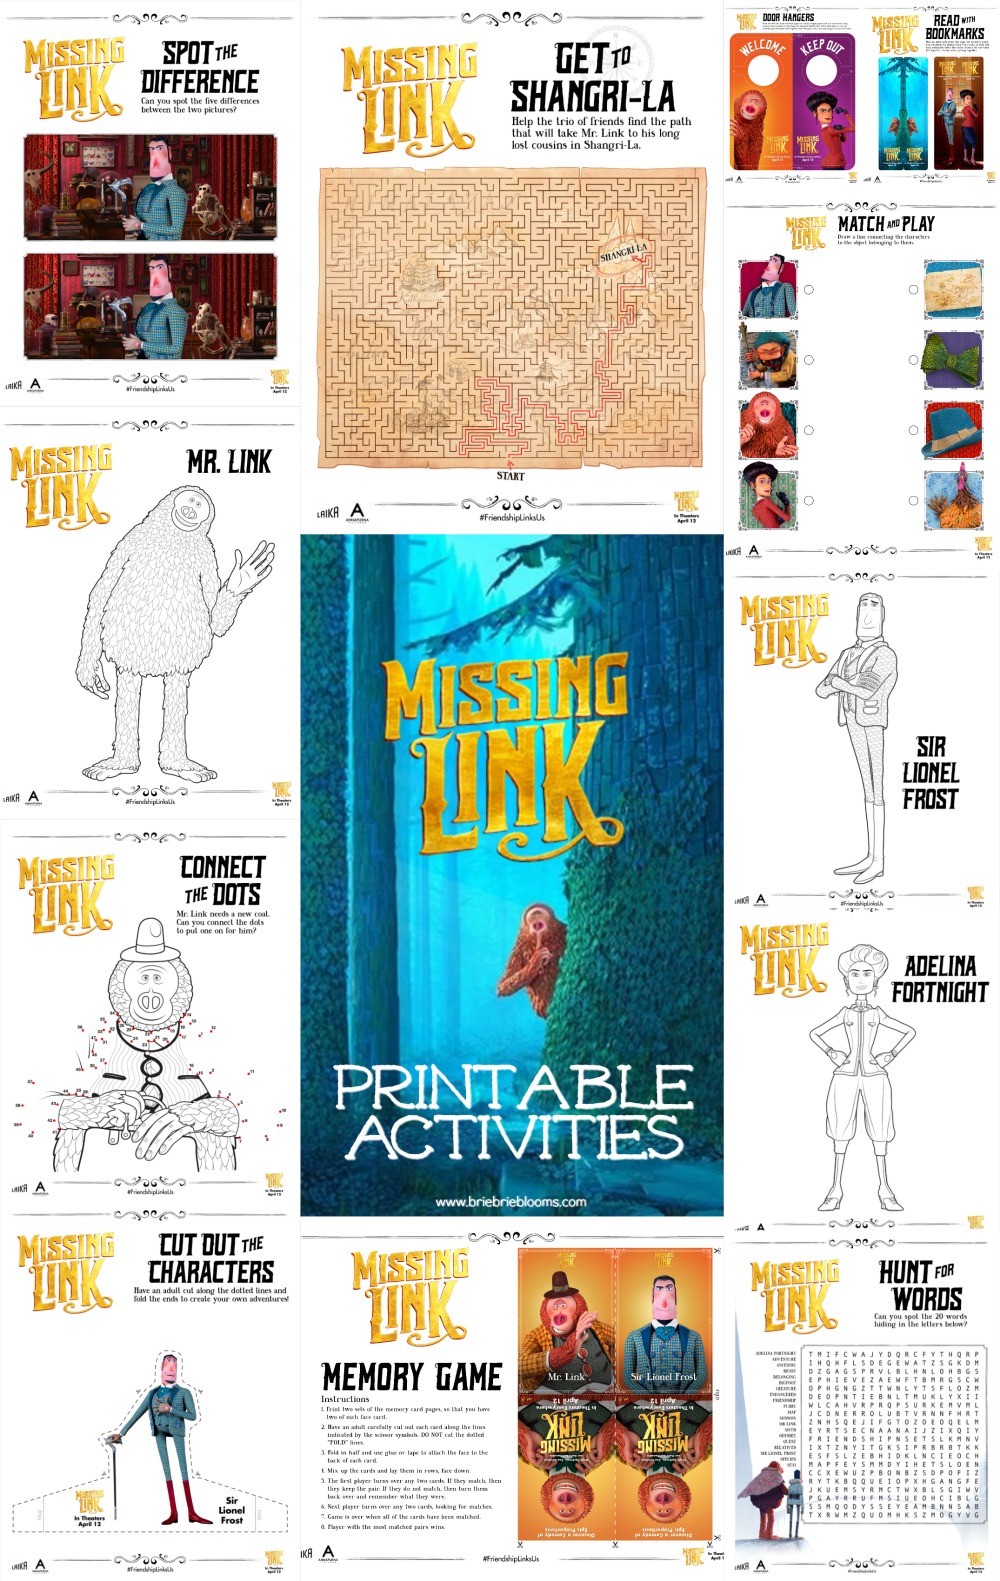 These Missing Link printable activities are a perfect way to prepare for the movie in theaters April 12.